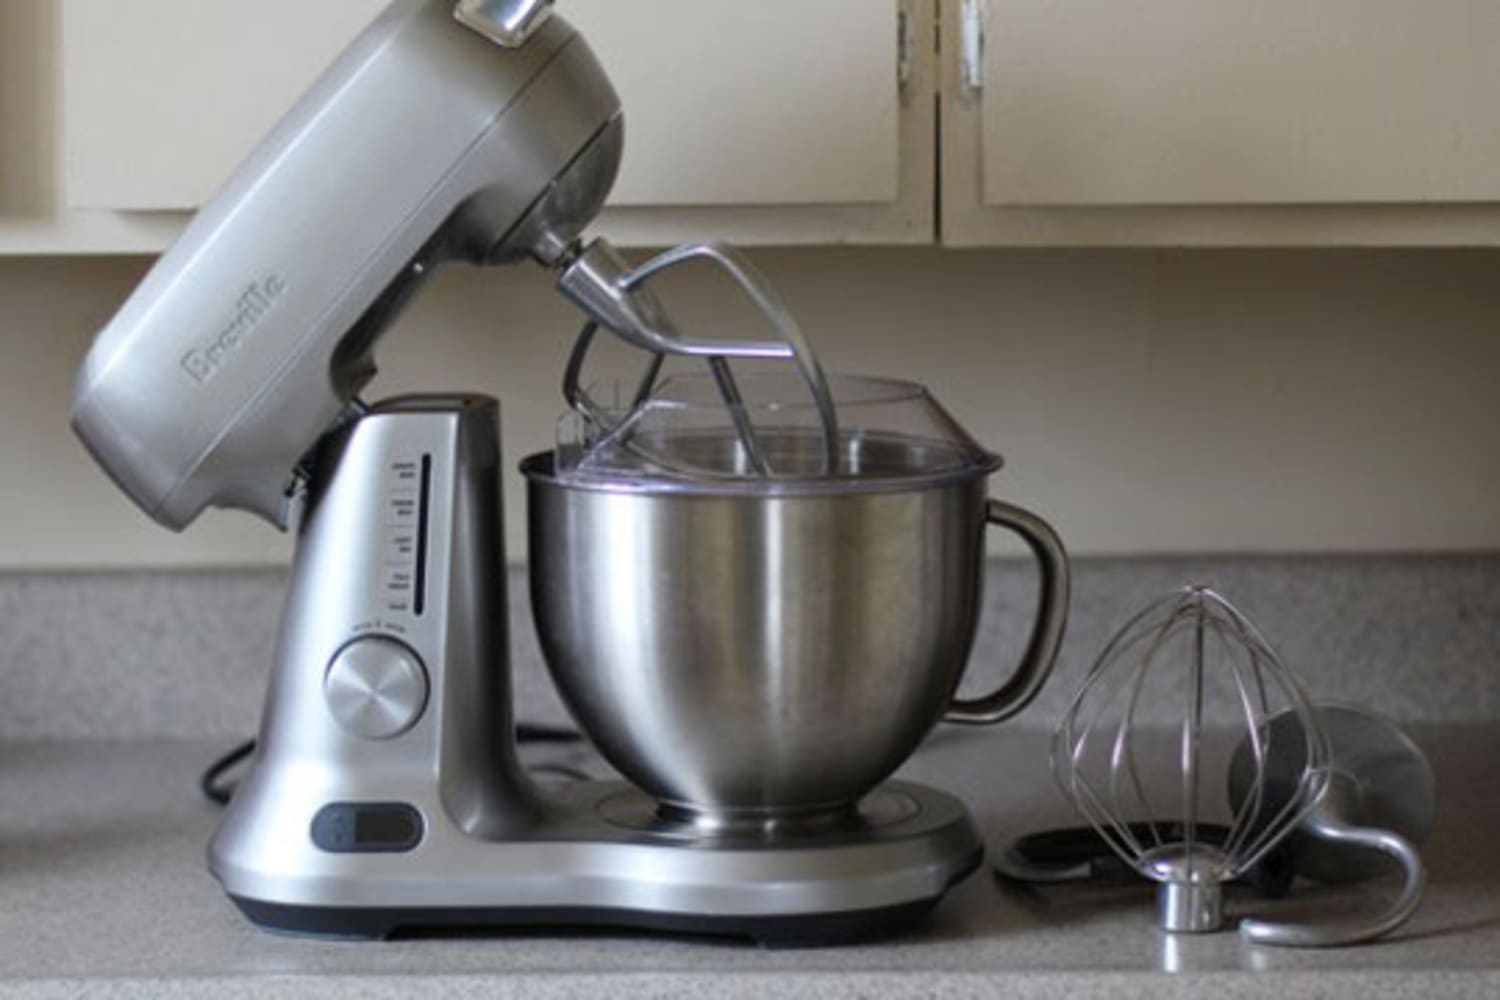 Product Review: Breville 5-Quart Stand Mixer